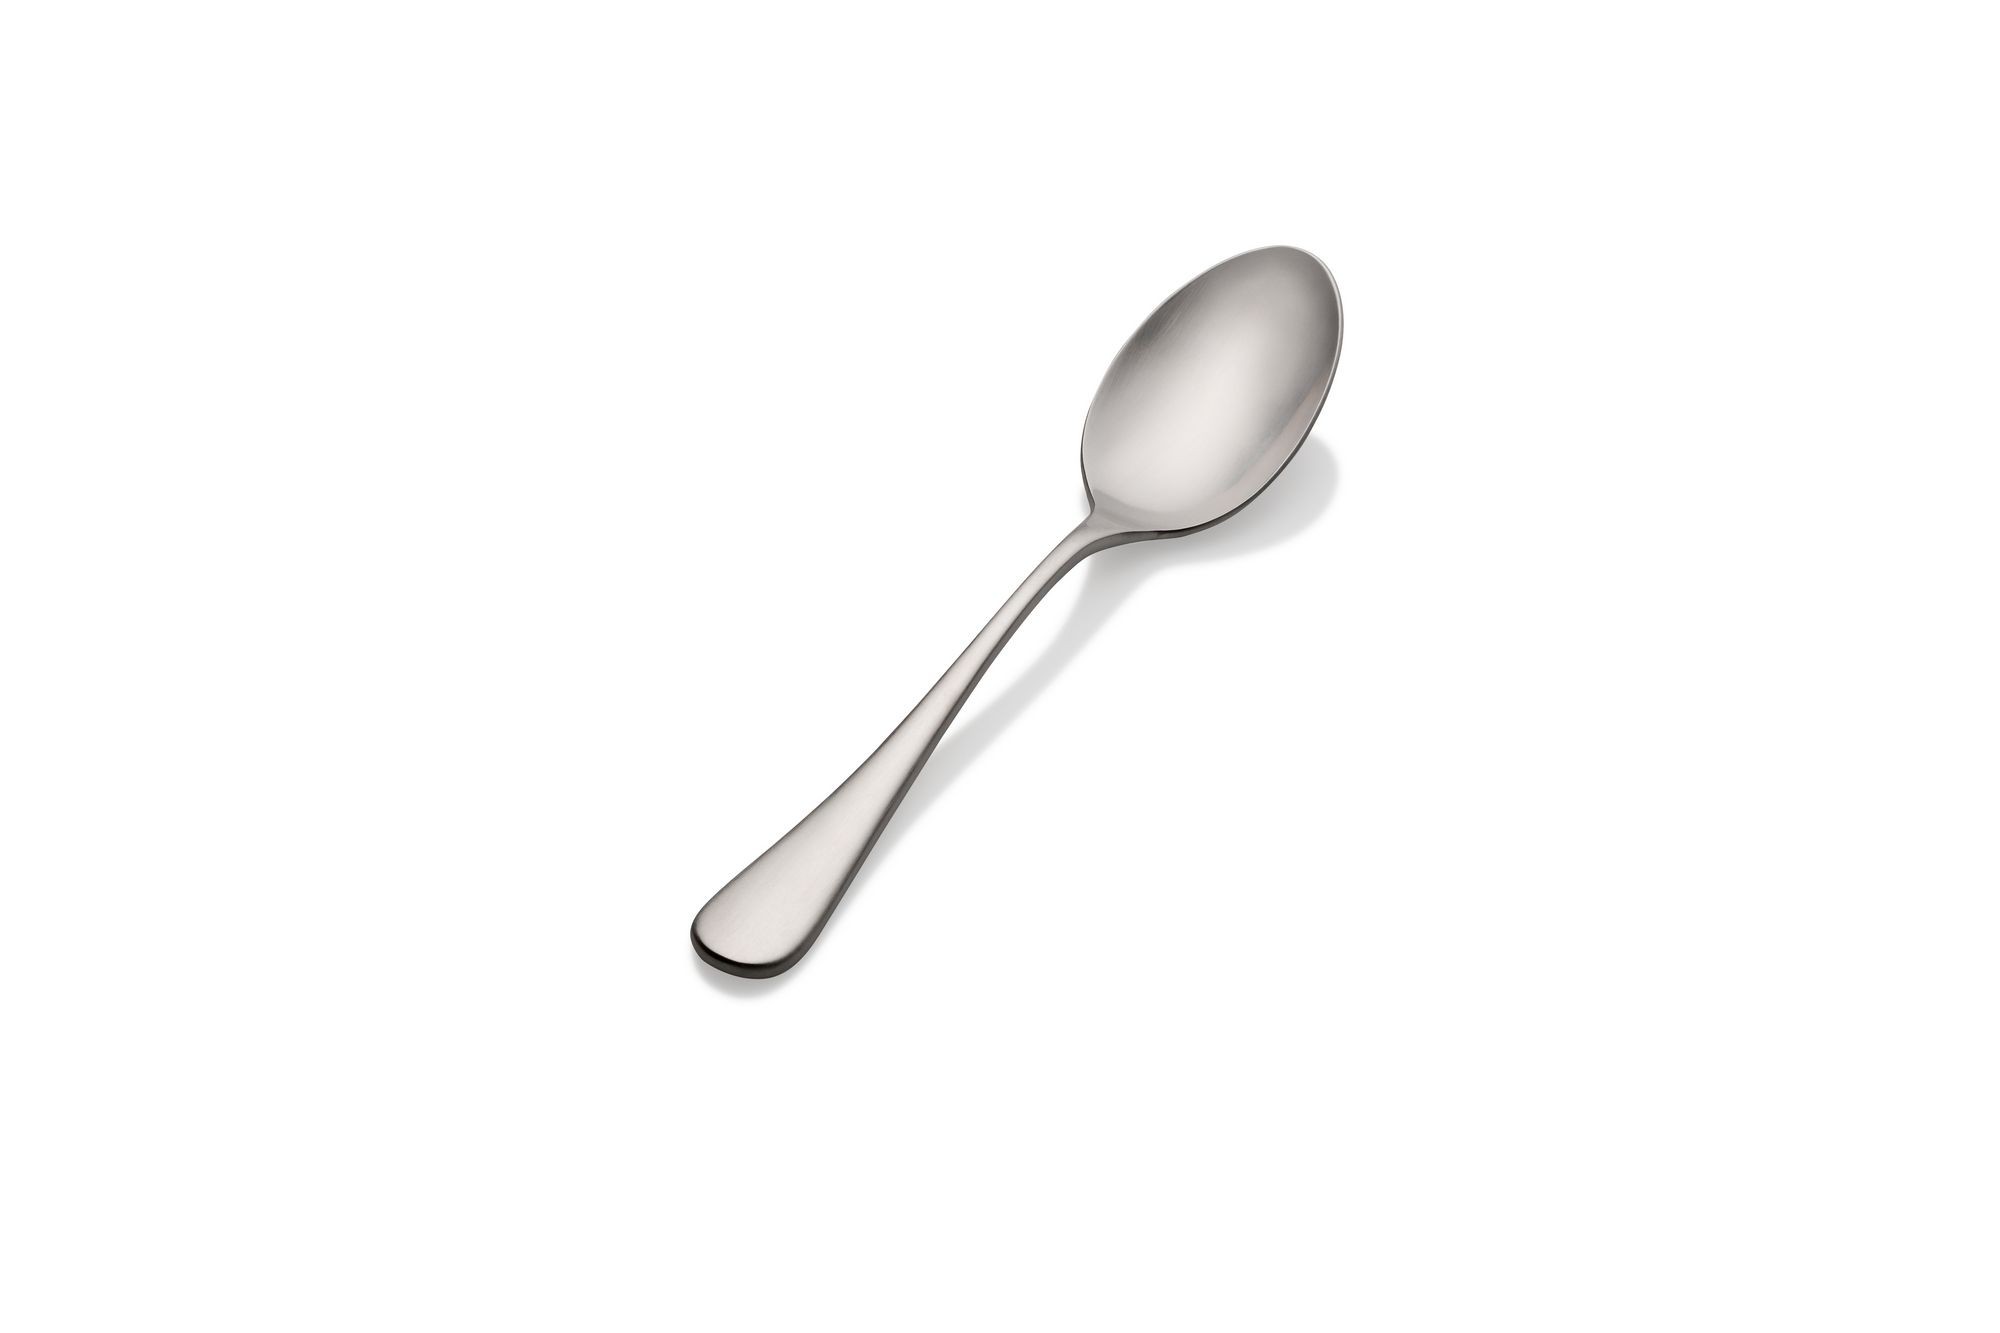 Bon Chef S4104 Como Satin Finish 18/8 Stainless Steel Serving Spoon